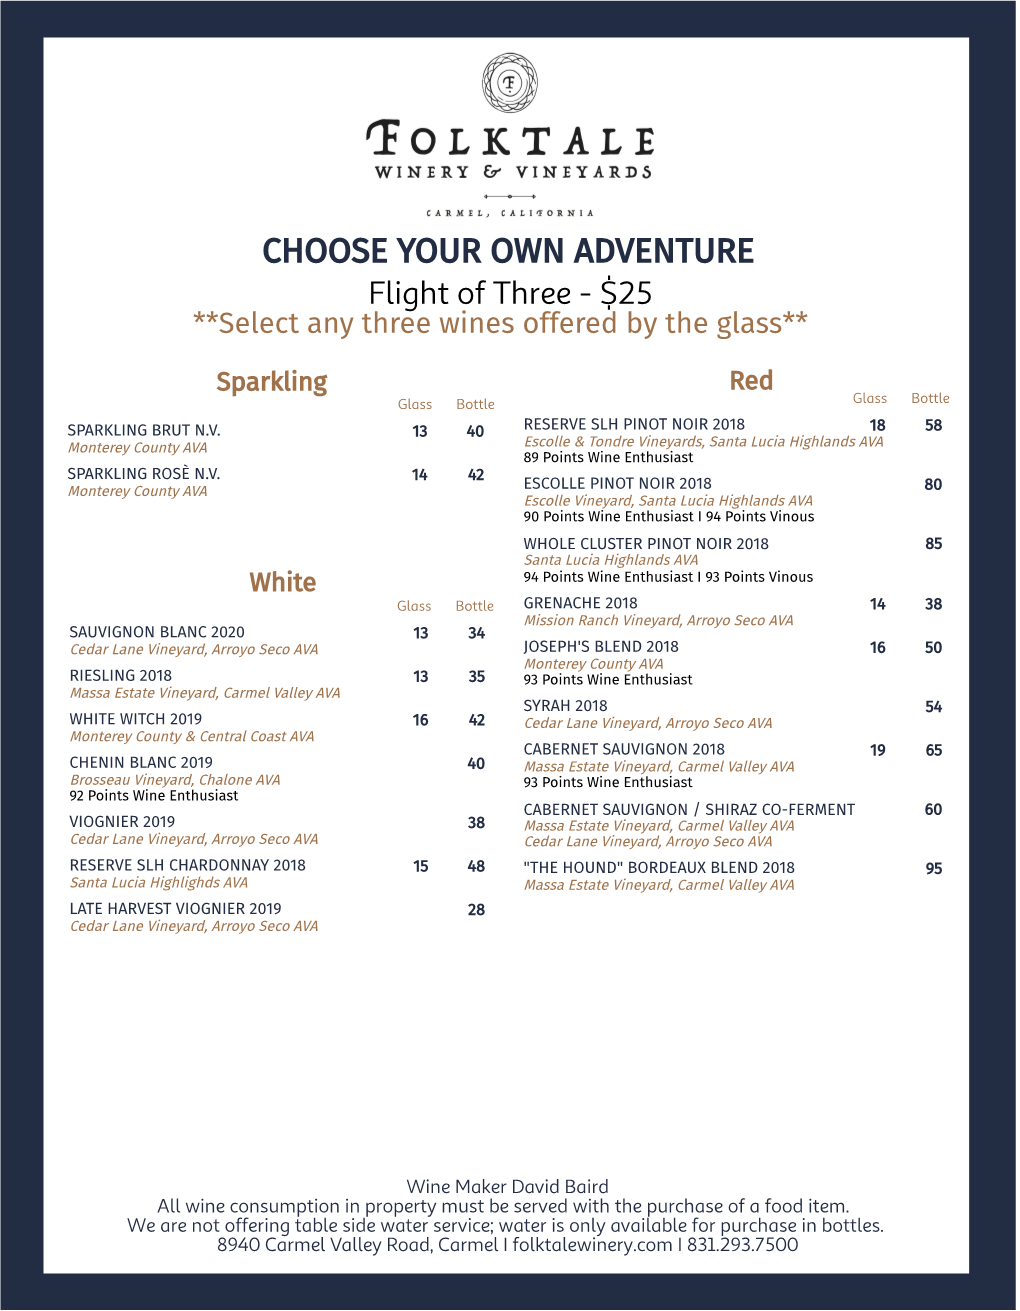 CHOOSE YOUR OWN ADVENTURE Flight of Three - $25 **Select Any Three Wines Offered by the Glass**